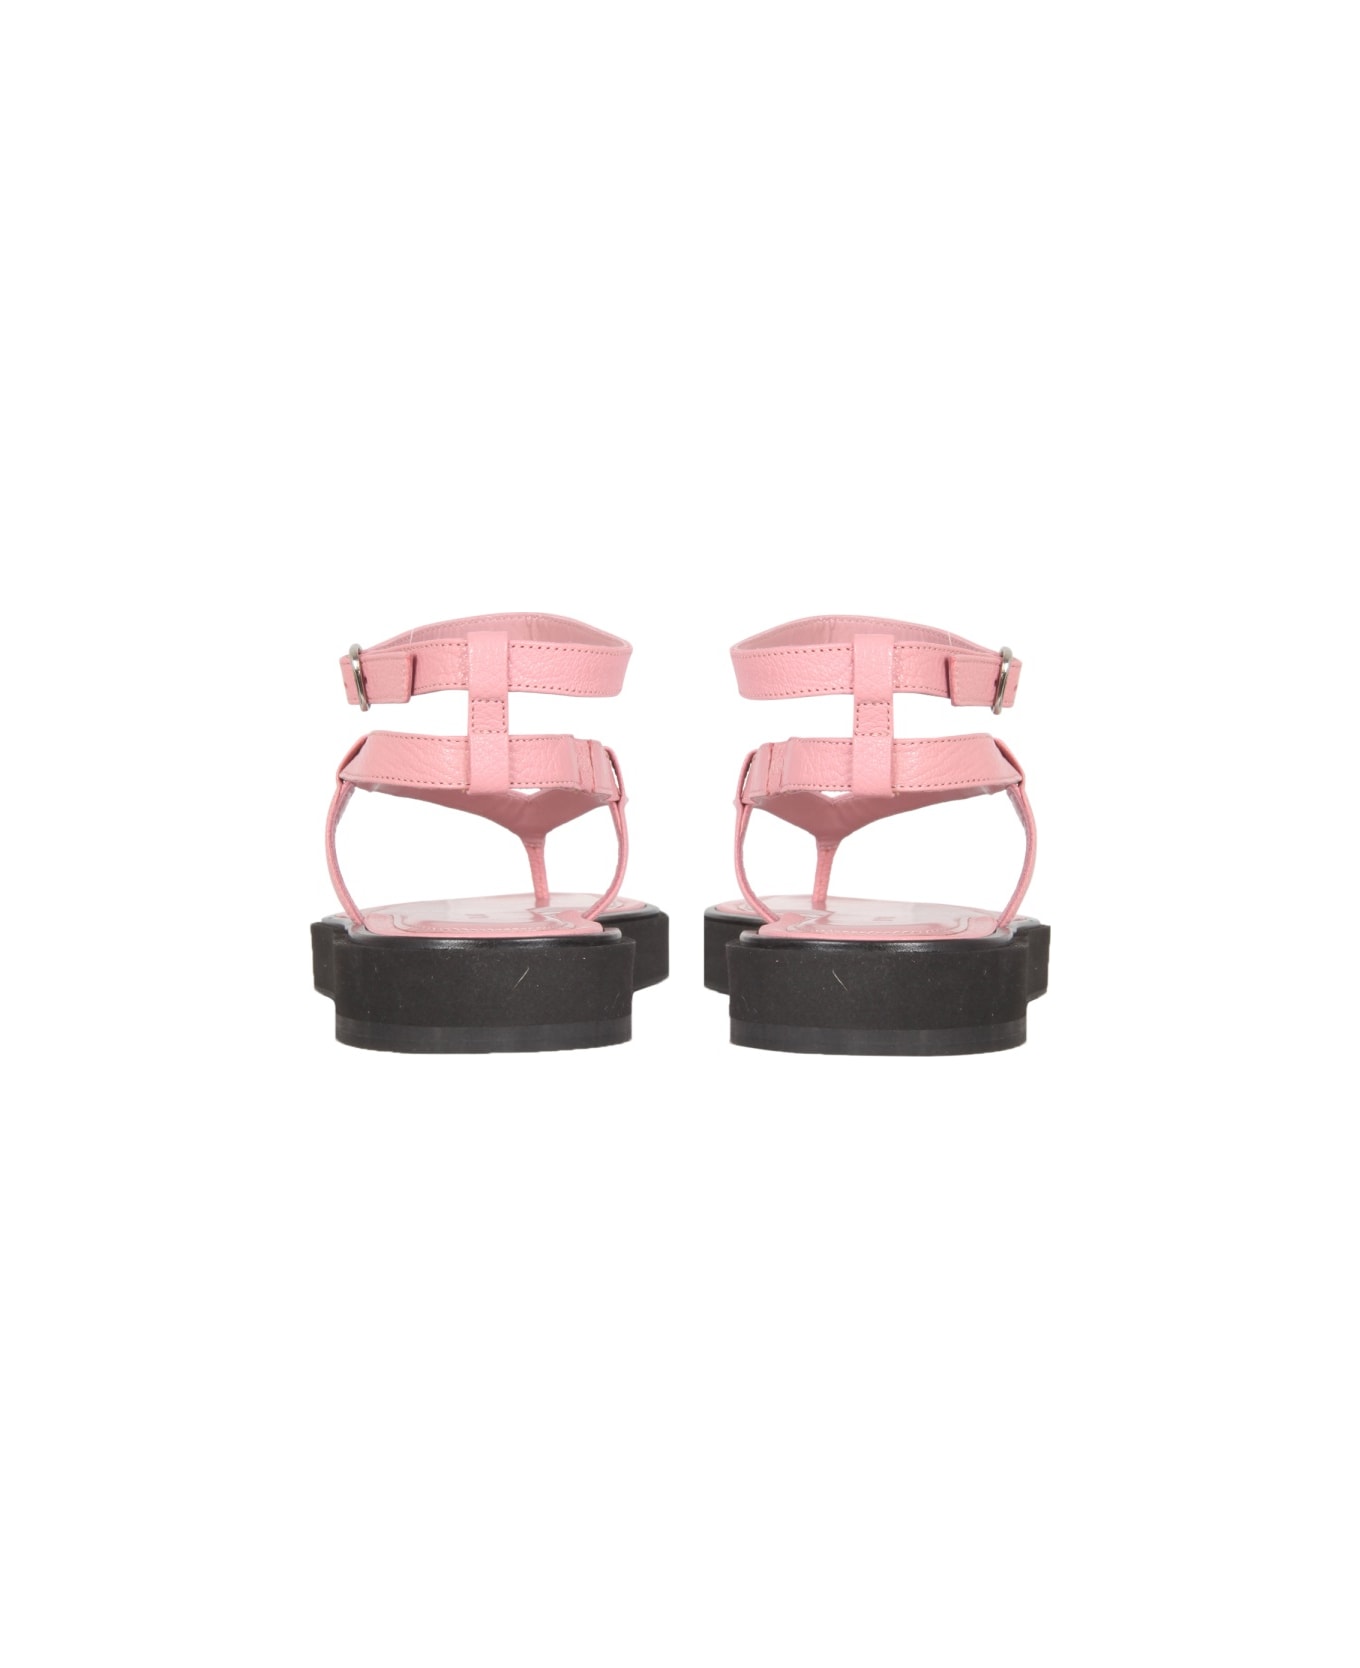 BY FAR Cece Thong Sandals - PINK サンダル